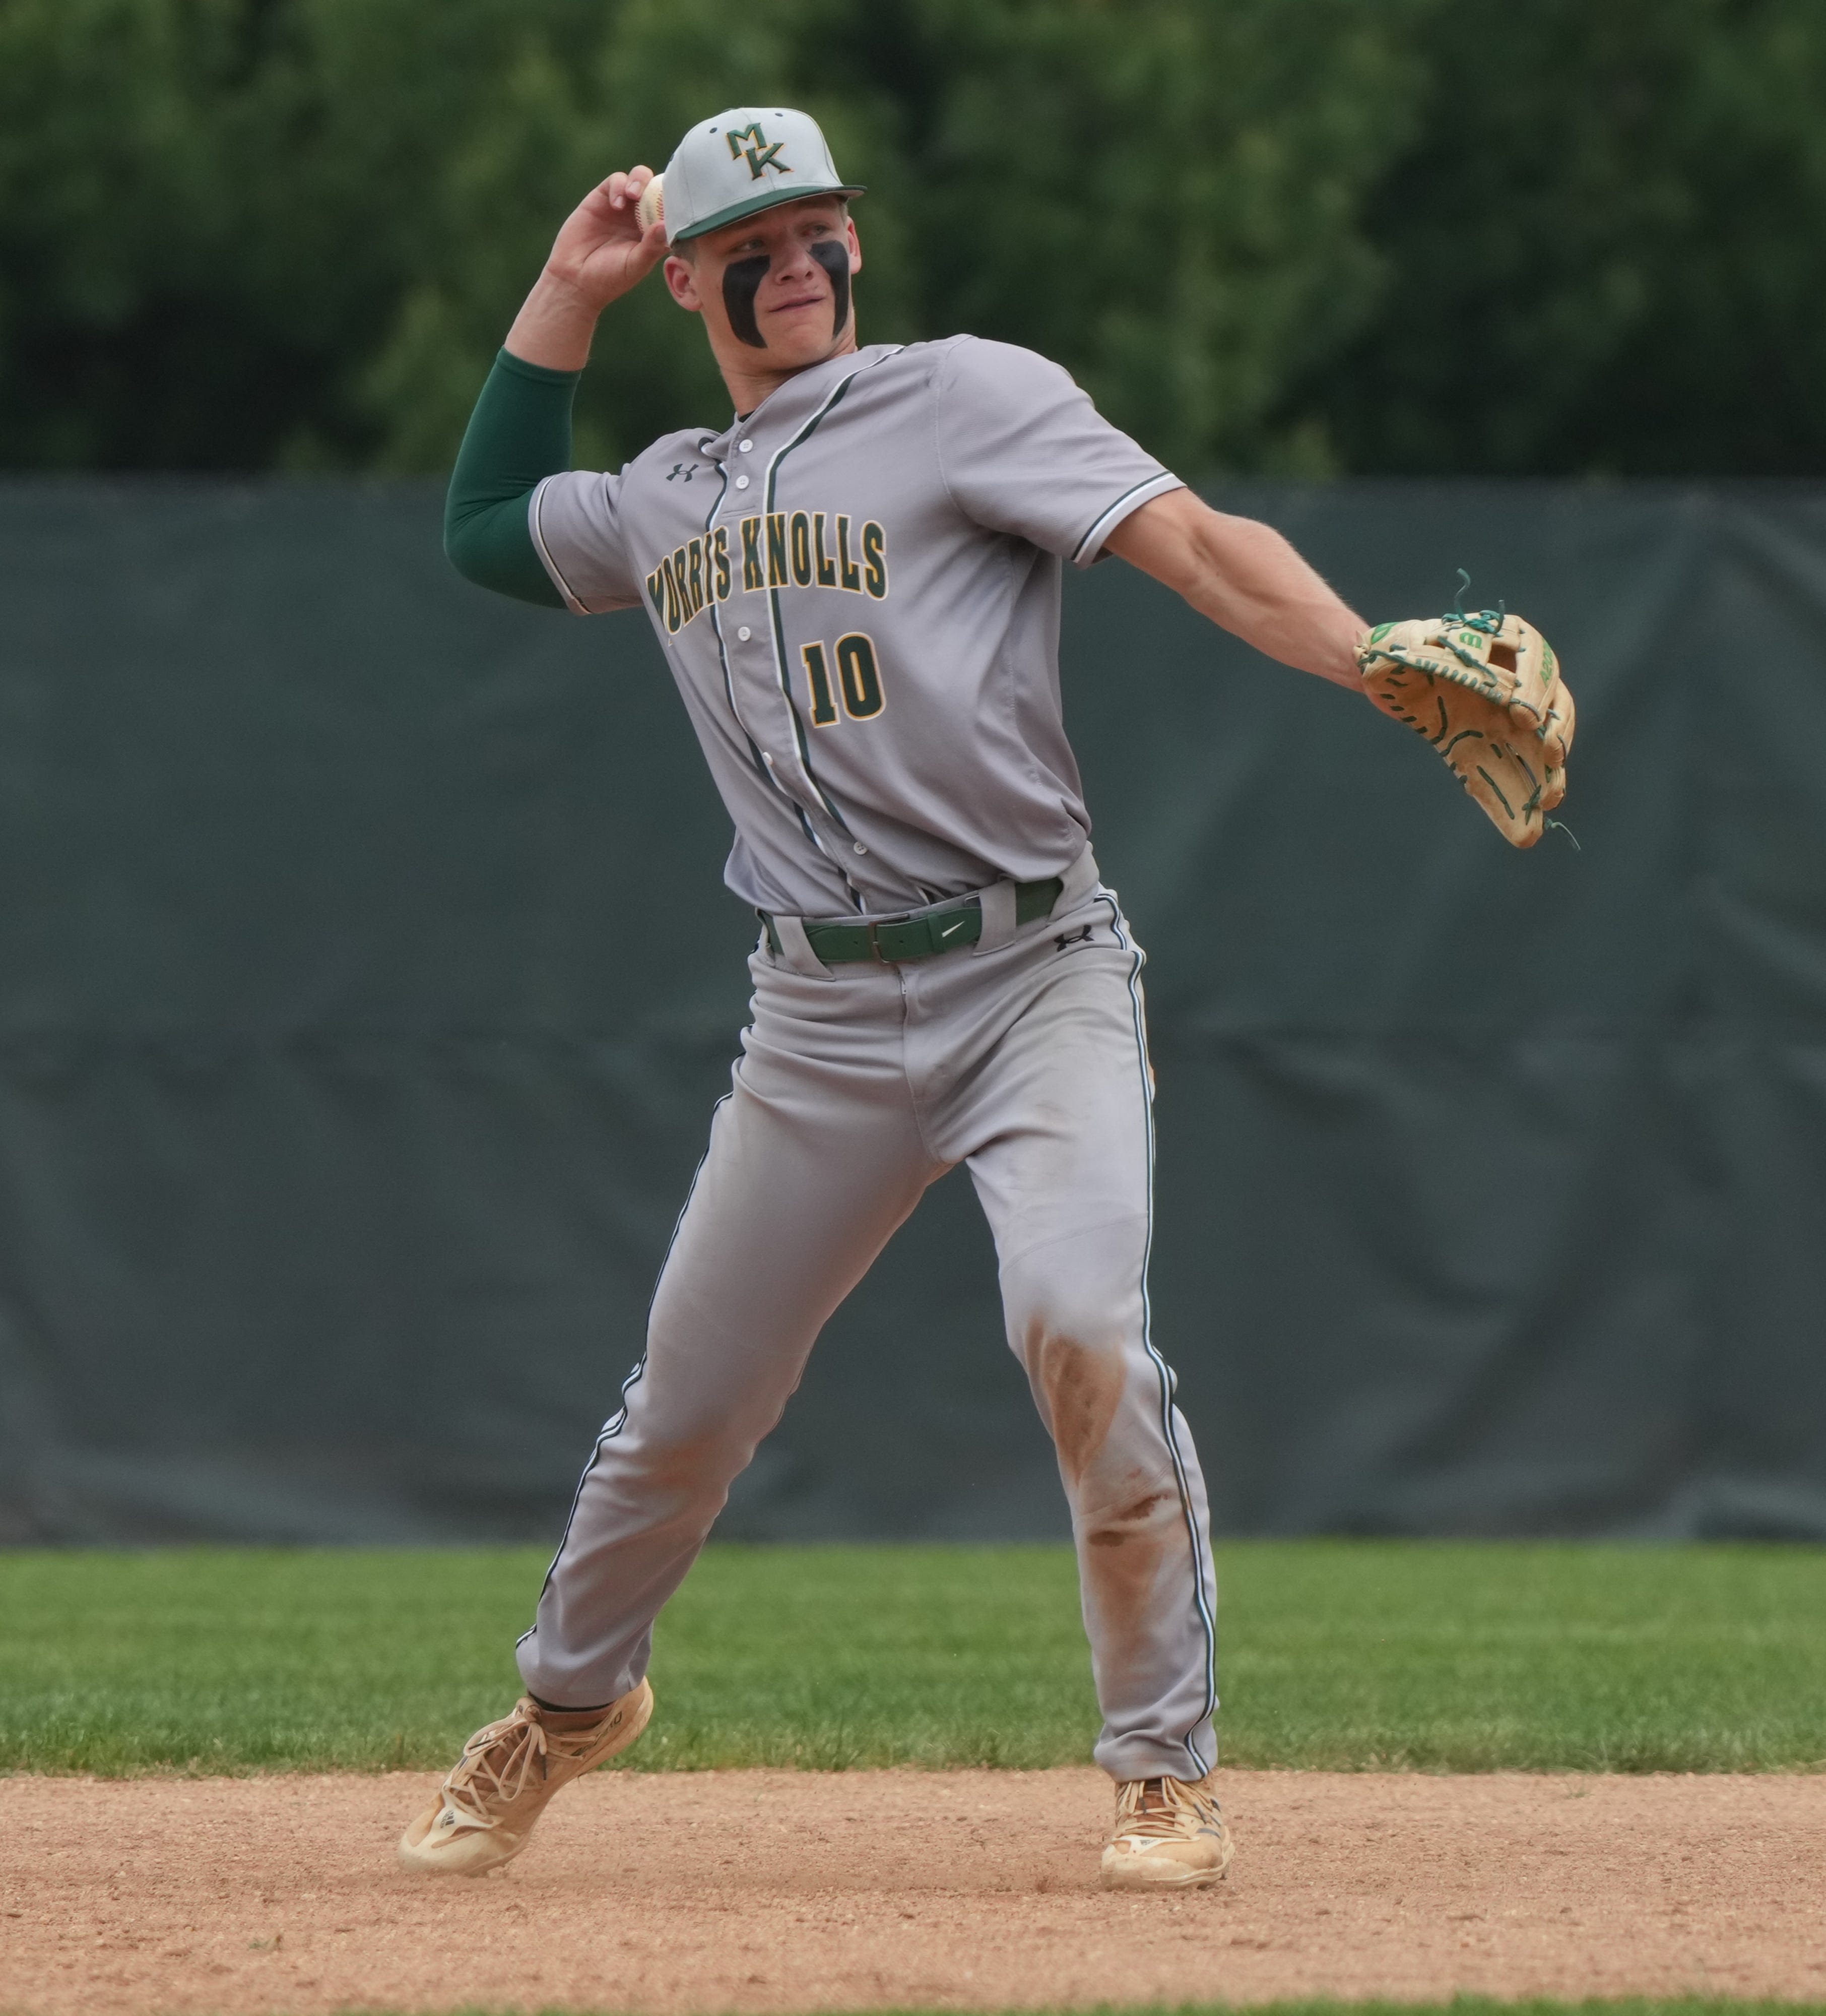 Morris County baseball star selected by Washington Nationals in MLB Draft second round